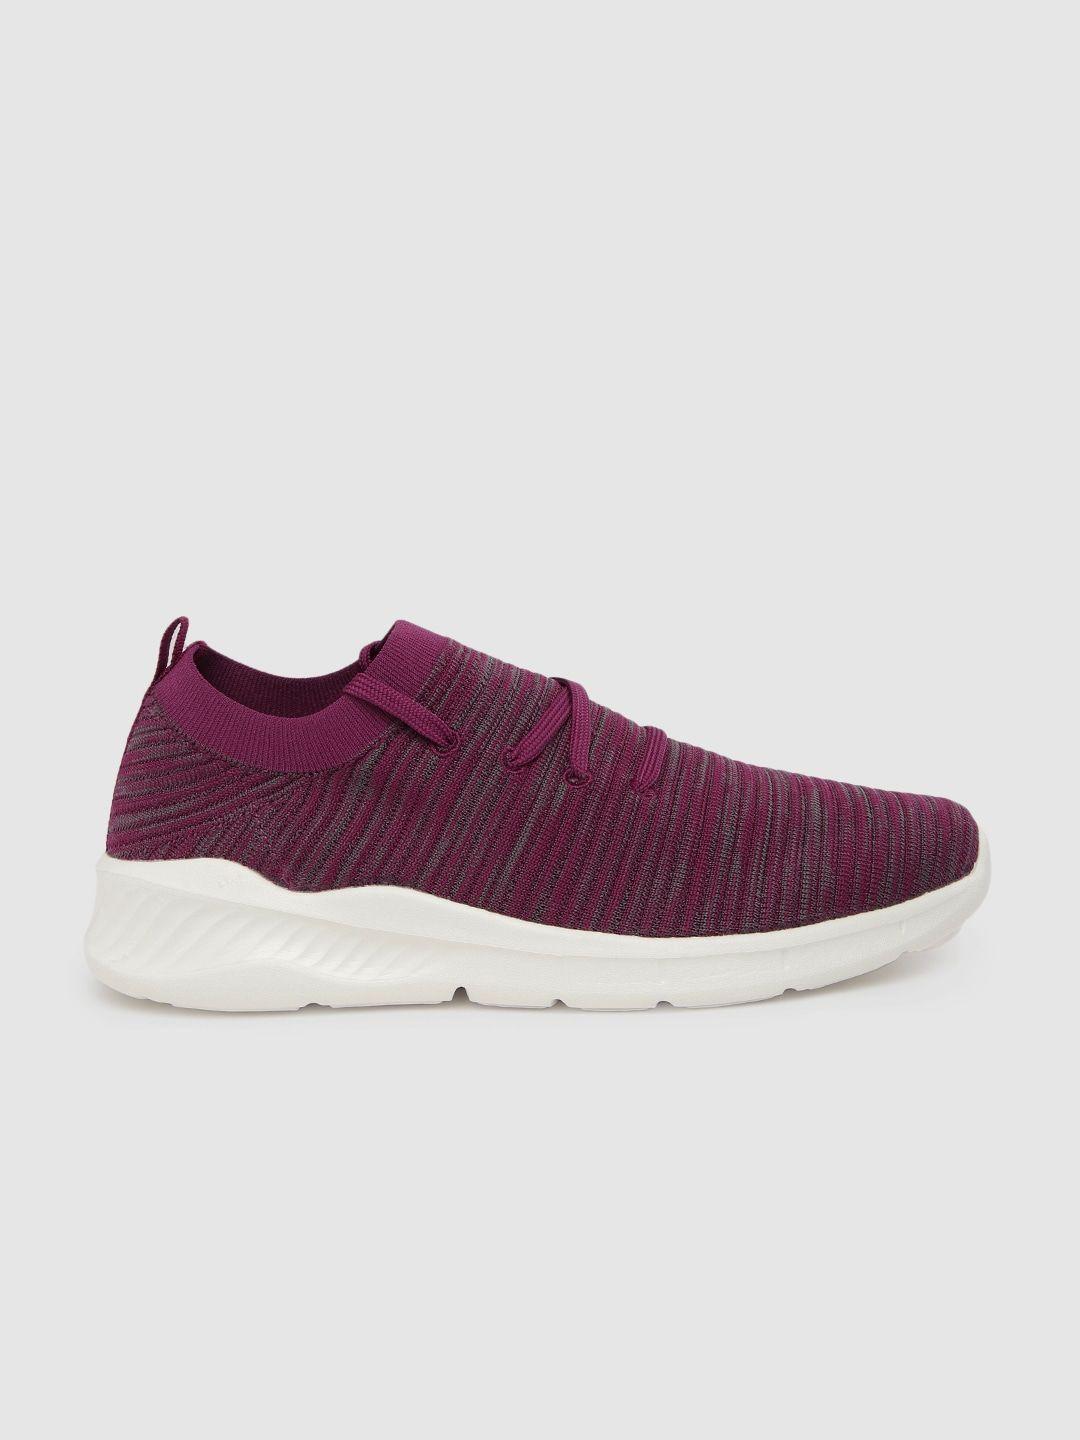 the roadster lifestyle co men maroon sneakers